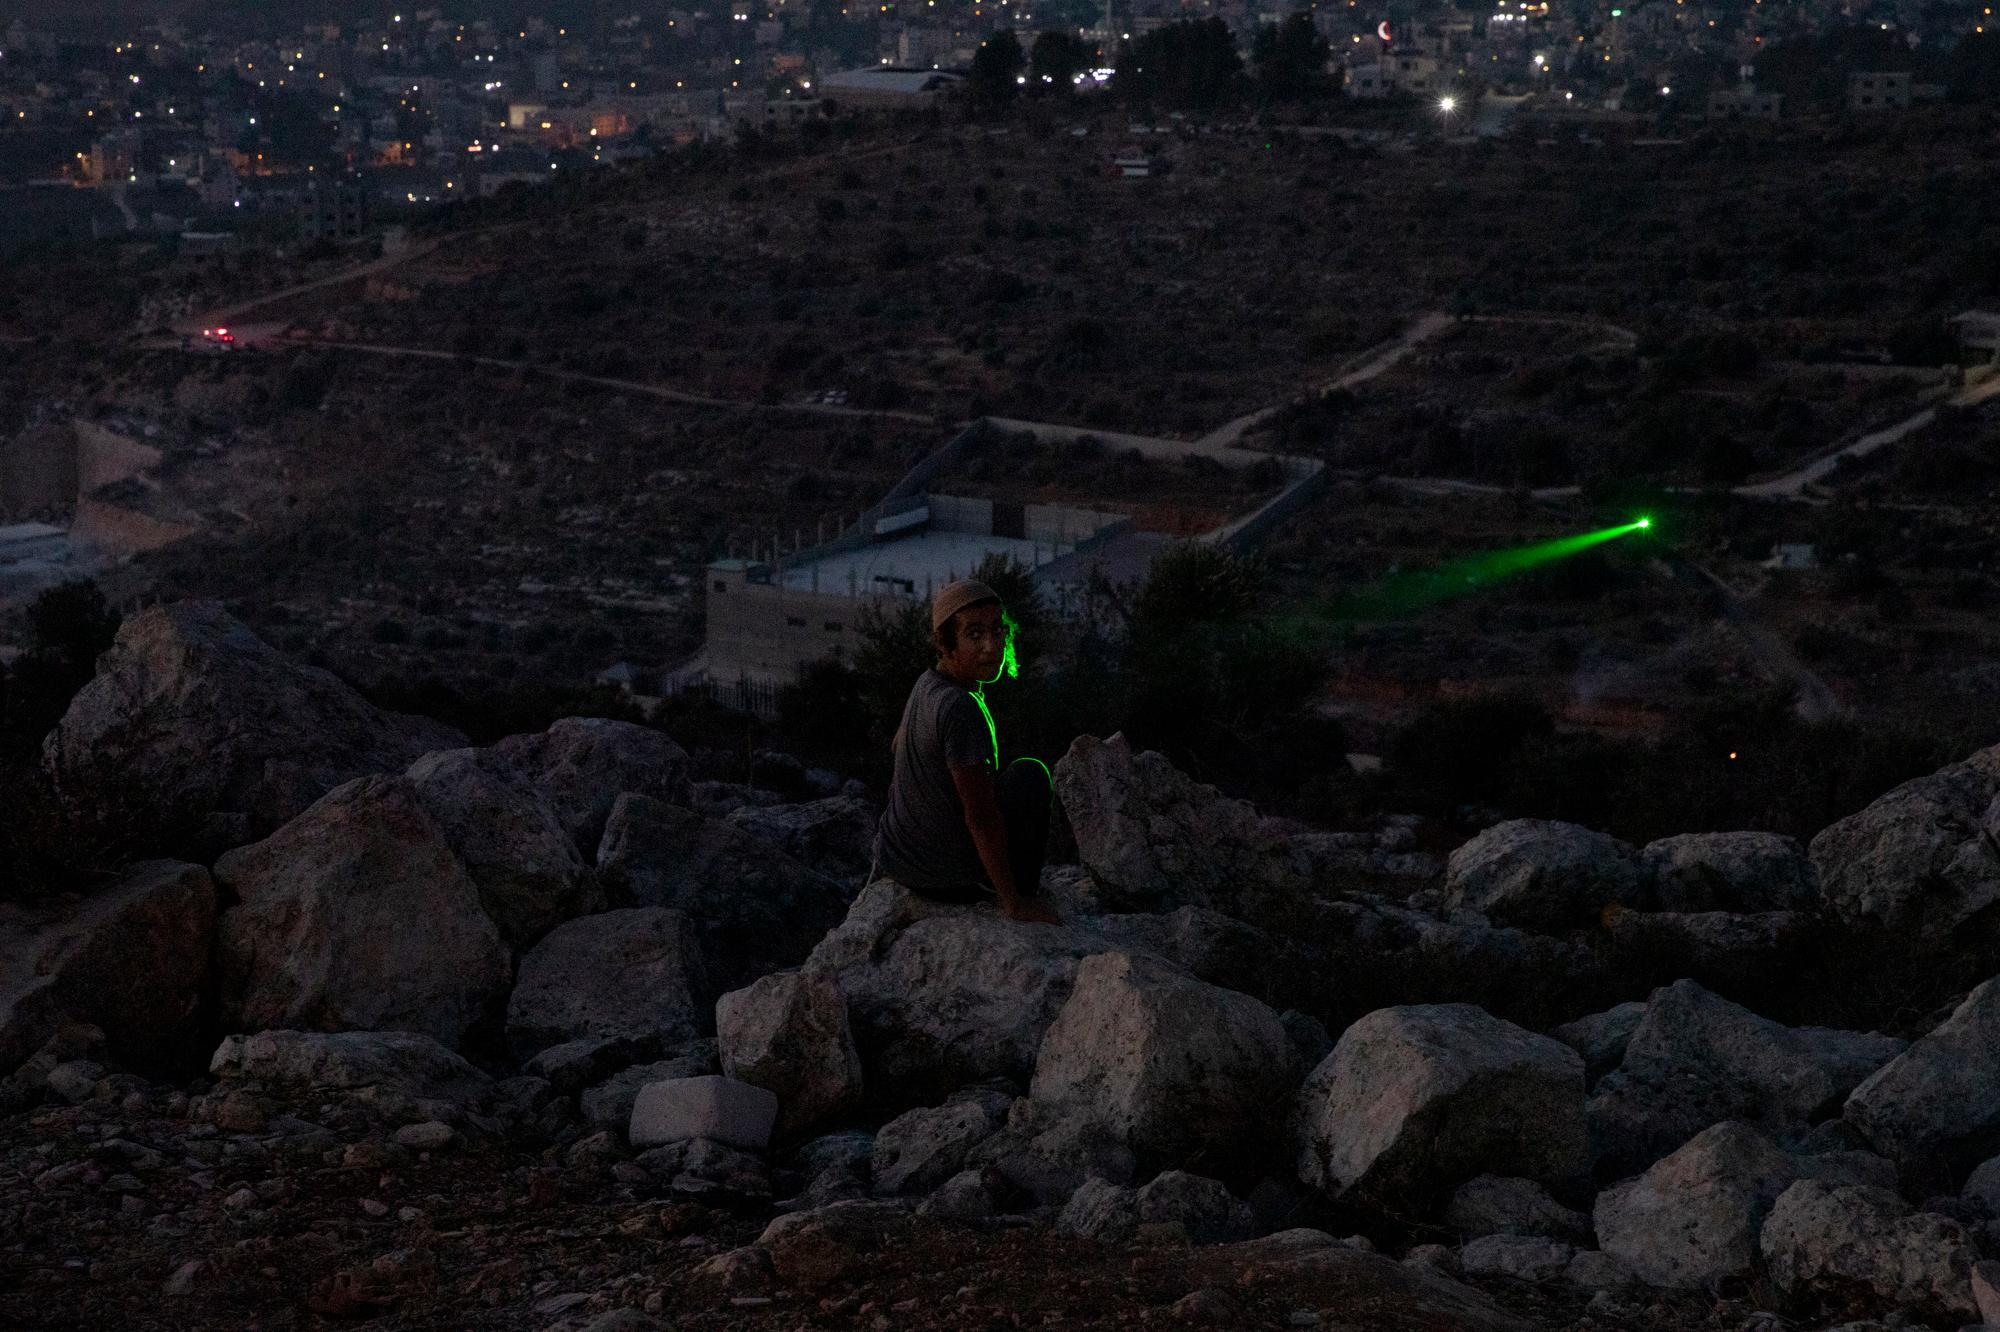 An Israeli settler is illuminated by a Palestinian protester’s laser at the recently established wildcat outpost of Eviatar near the West Bank city of Nablus, on July 1, 2021. (AP Photo/Maya Alleruzzo)